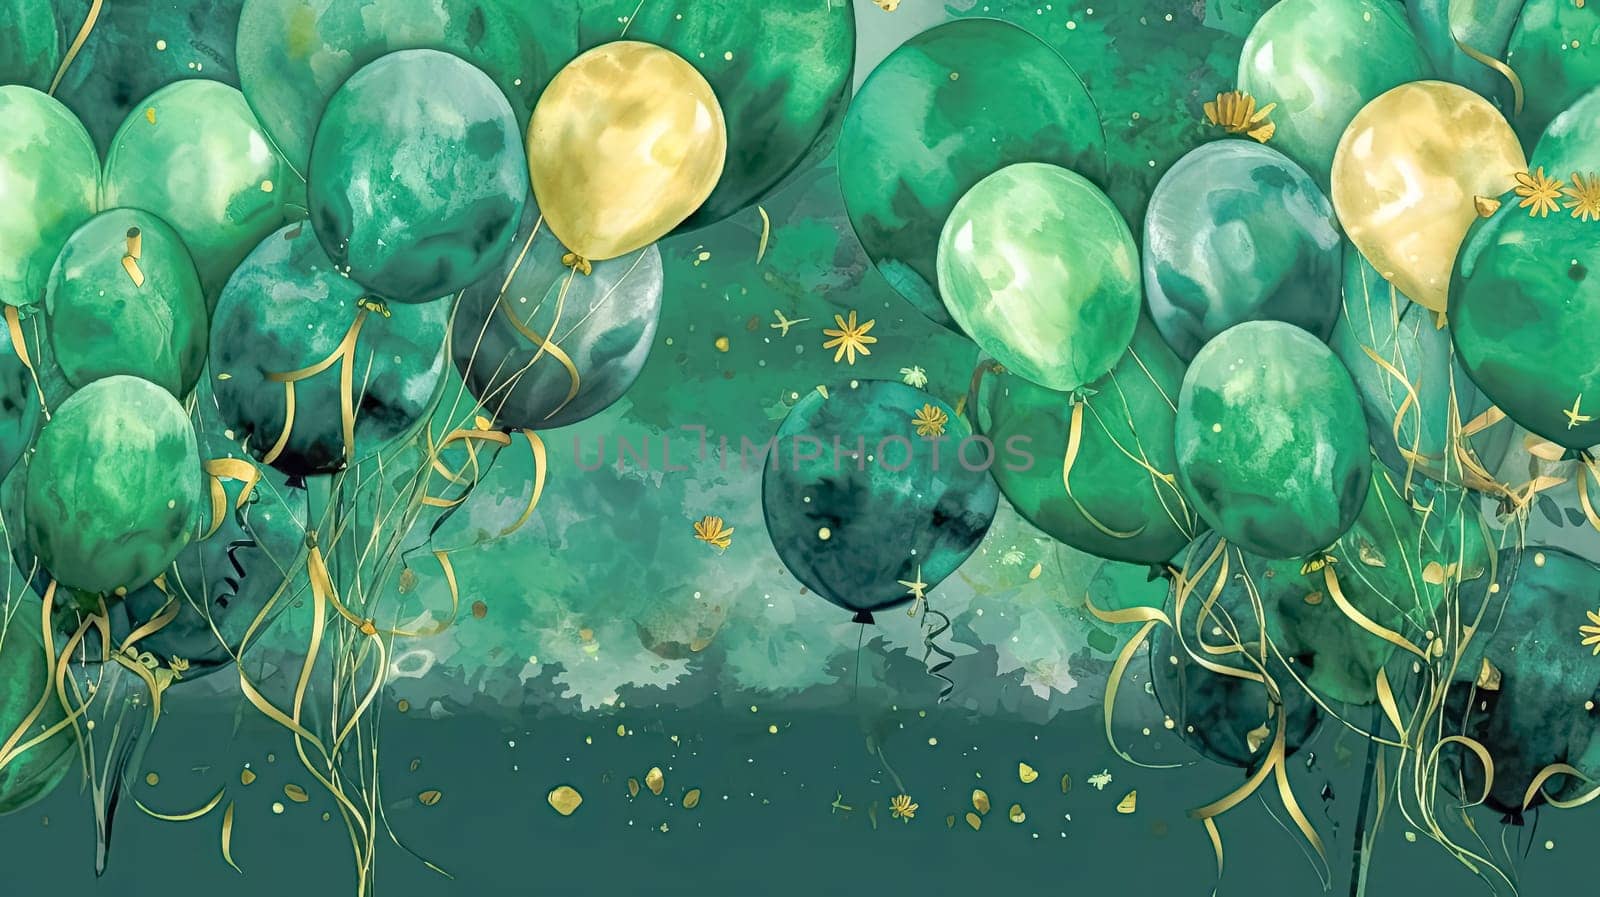 Watercolor illustration of a green and gold balloon by Alla_Morozova93